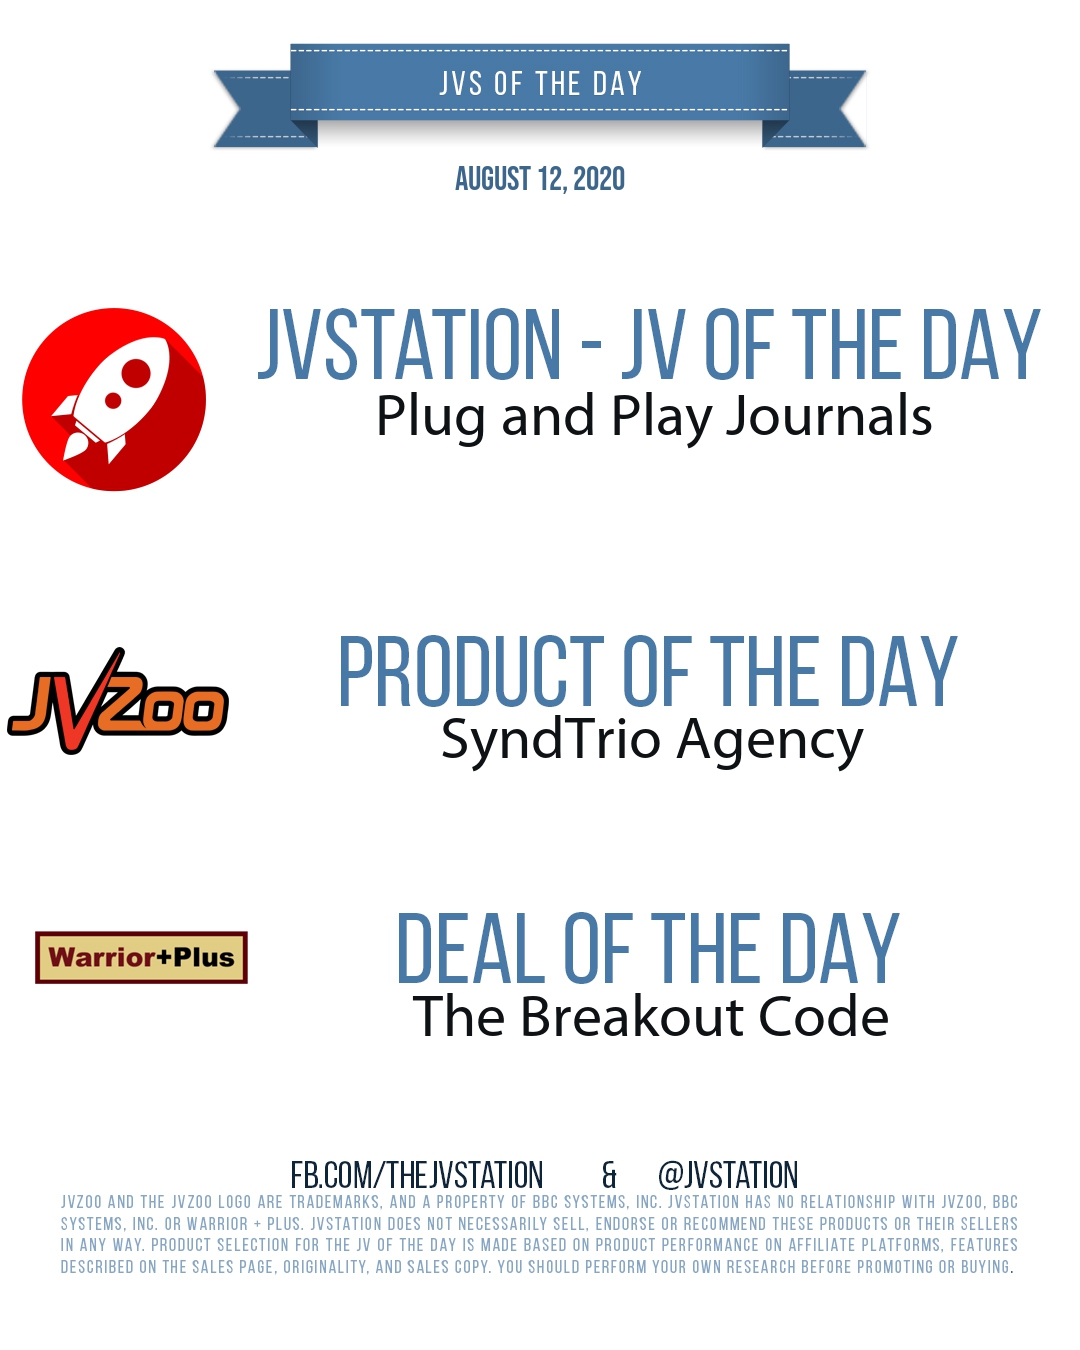 JVs of the day - August 12, 2020